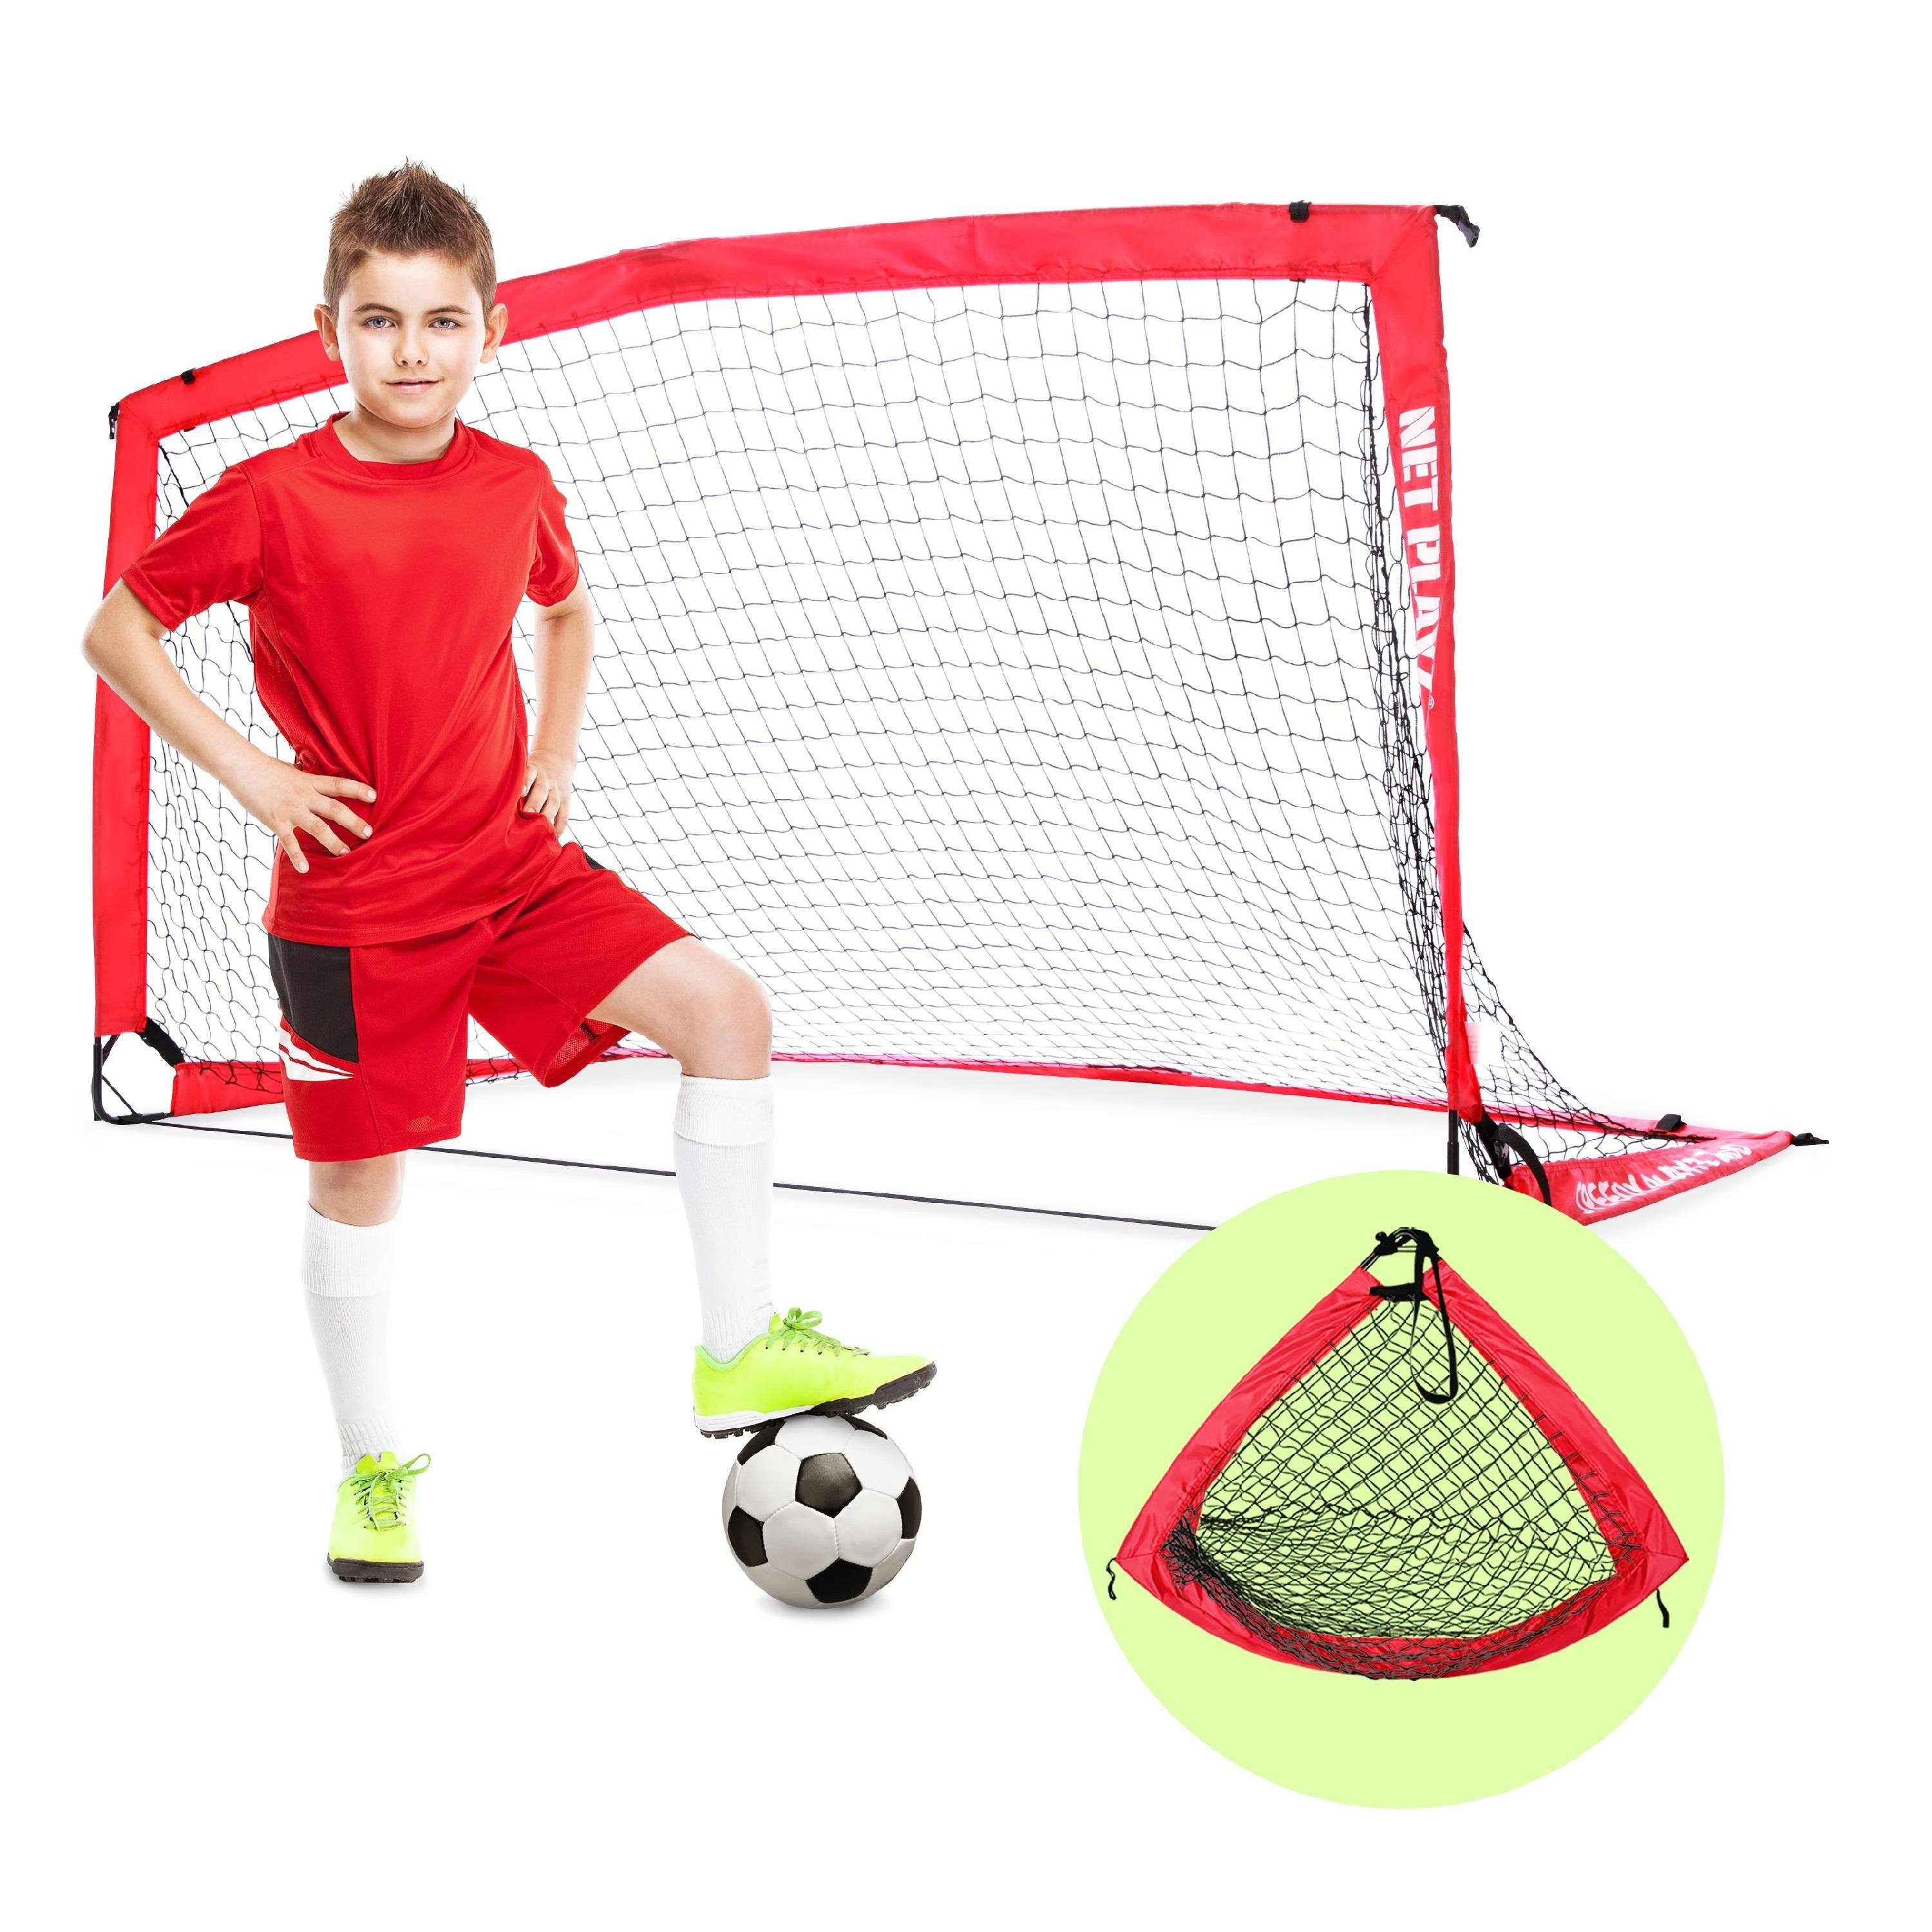 Pop Up Goal Net Portable Football Gate Fold Outdoor Kid Soccer Play Training Toy 